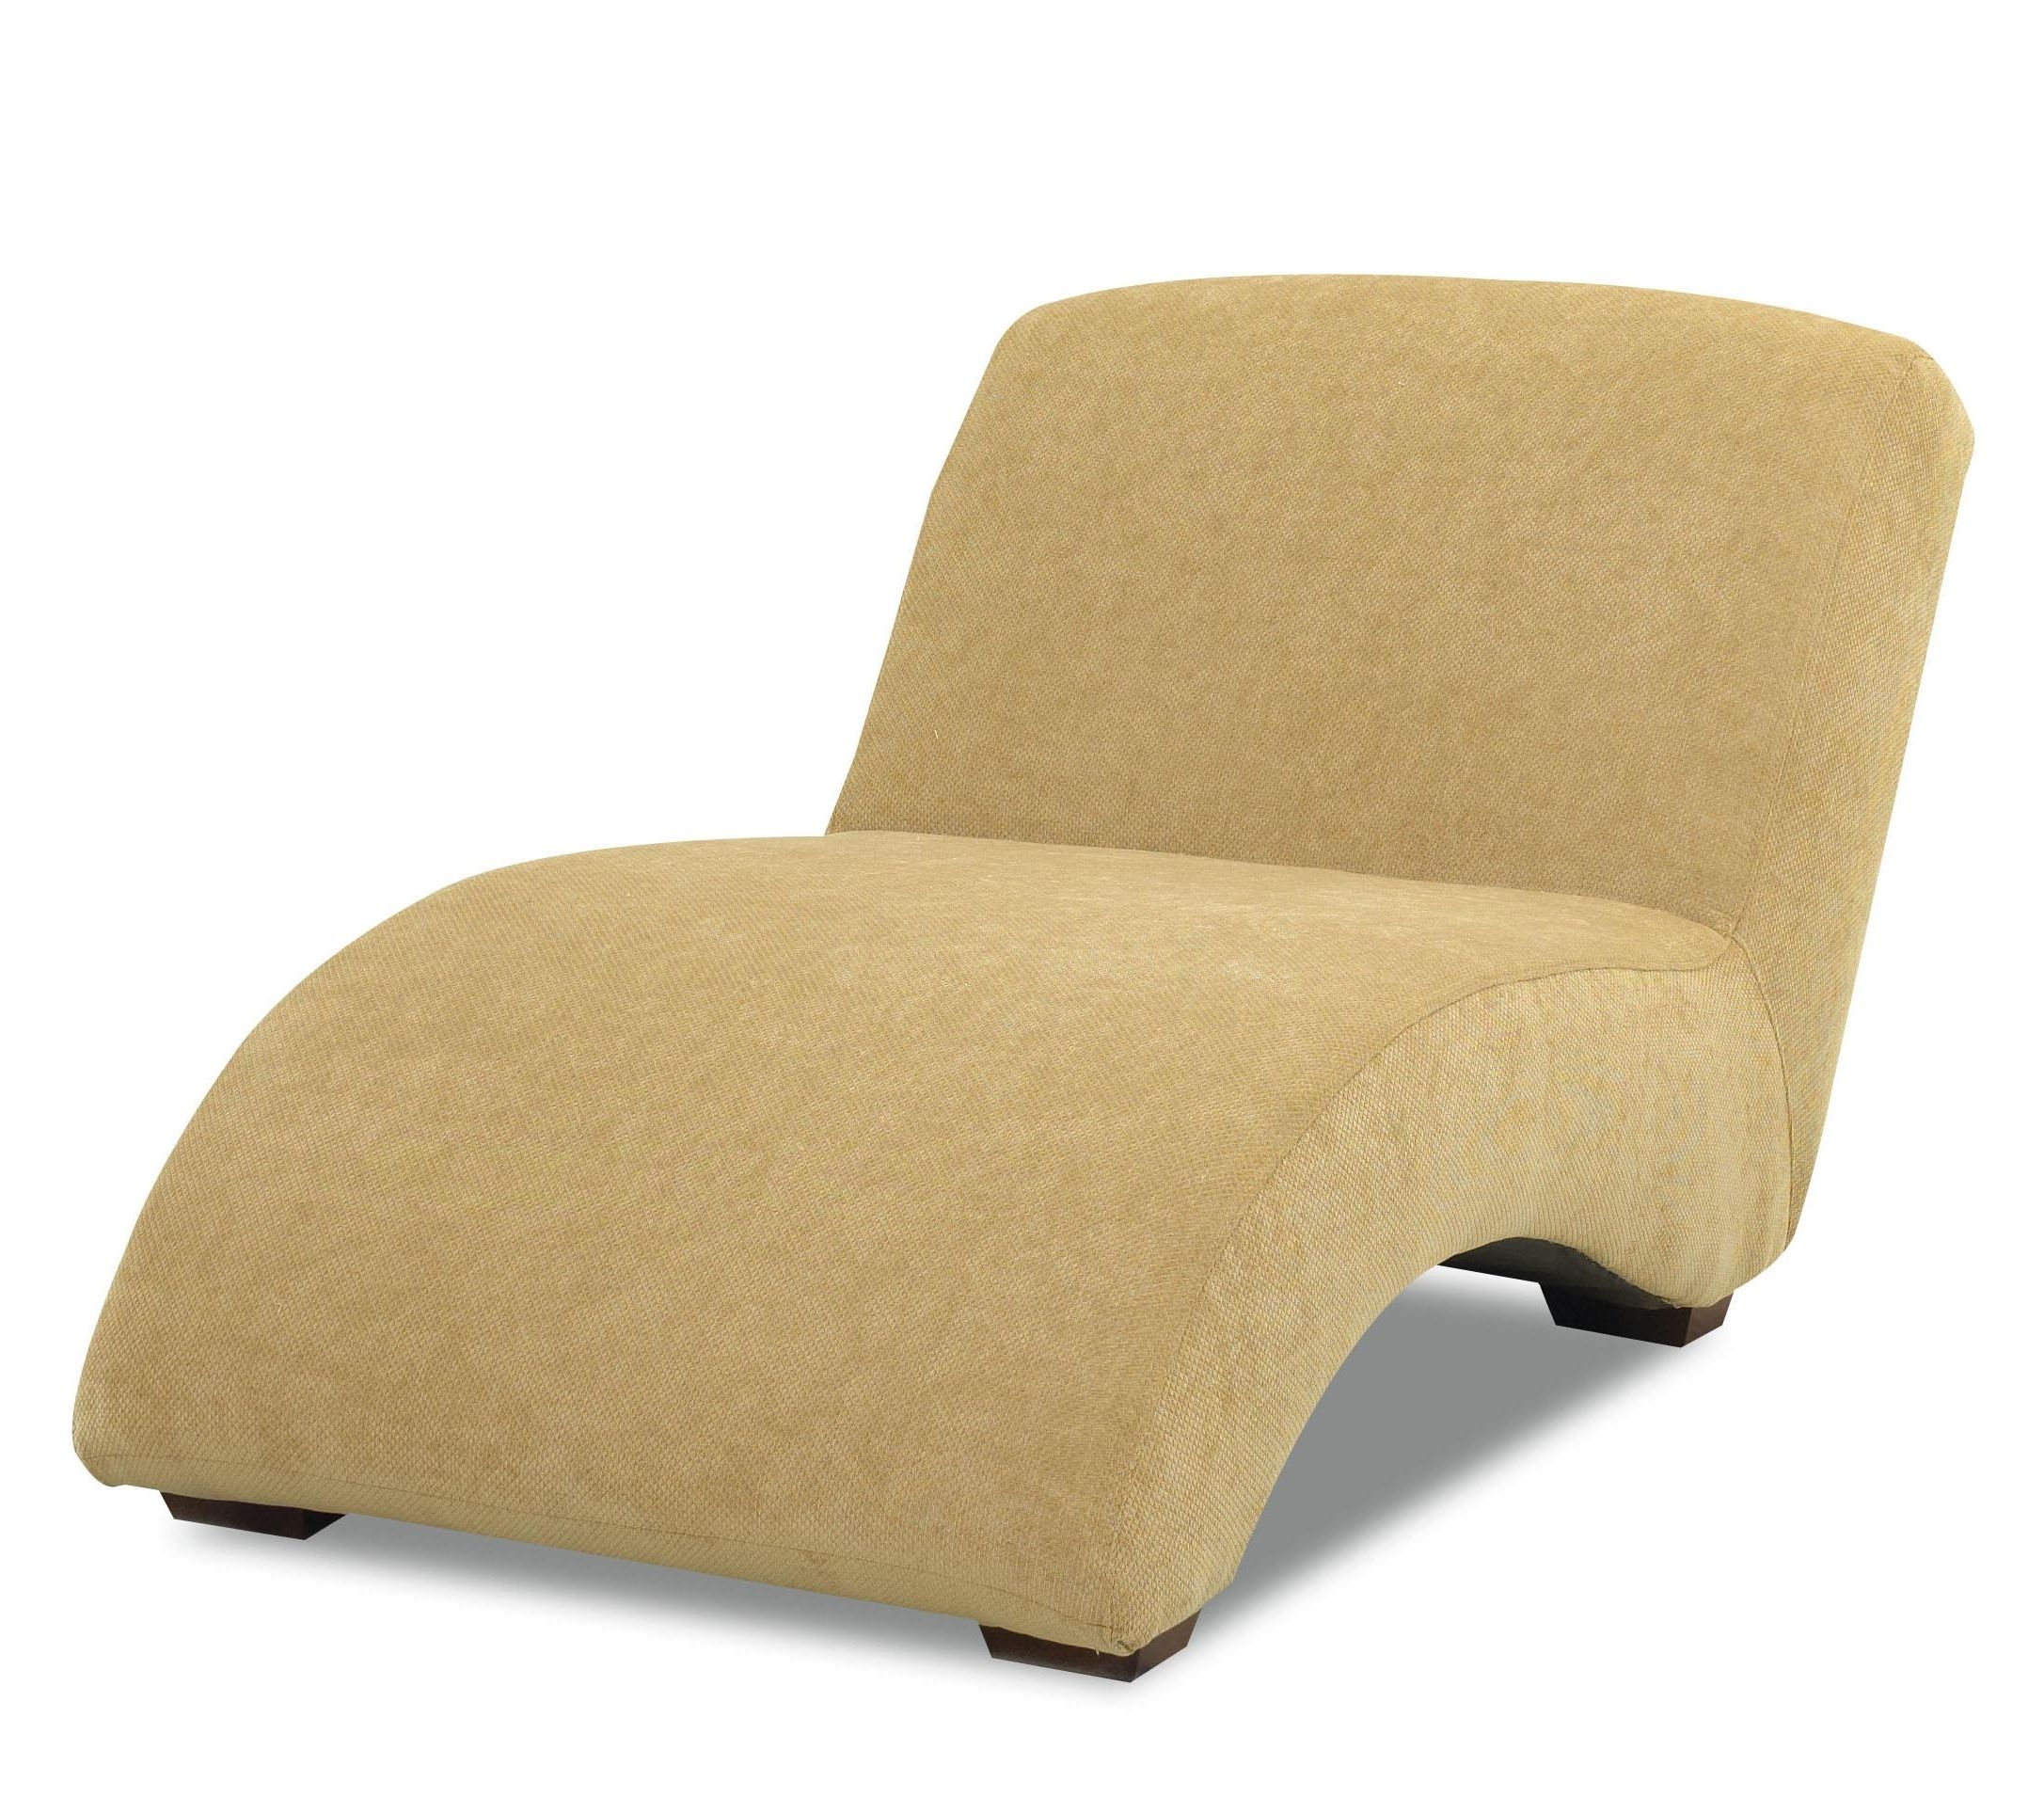 2018 Klaussner Chairs And Accents Oversized Celebration Armless Chaise Within Armless Chaise Lounges (View 1 of 15)